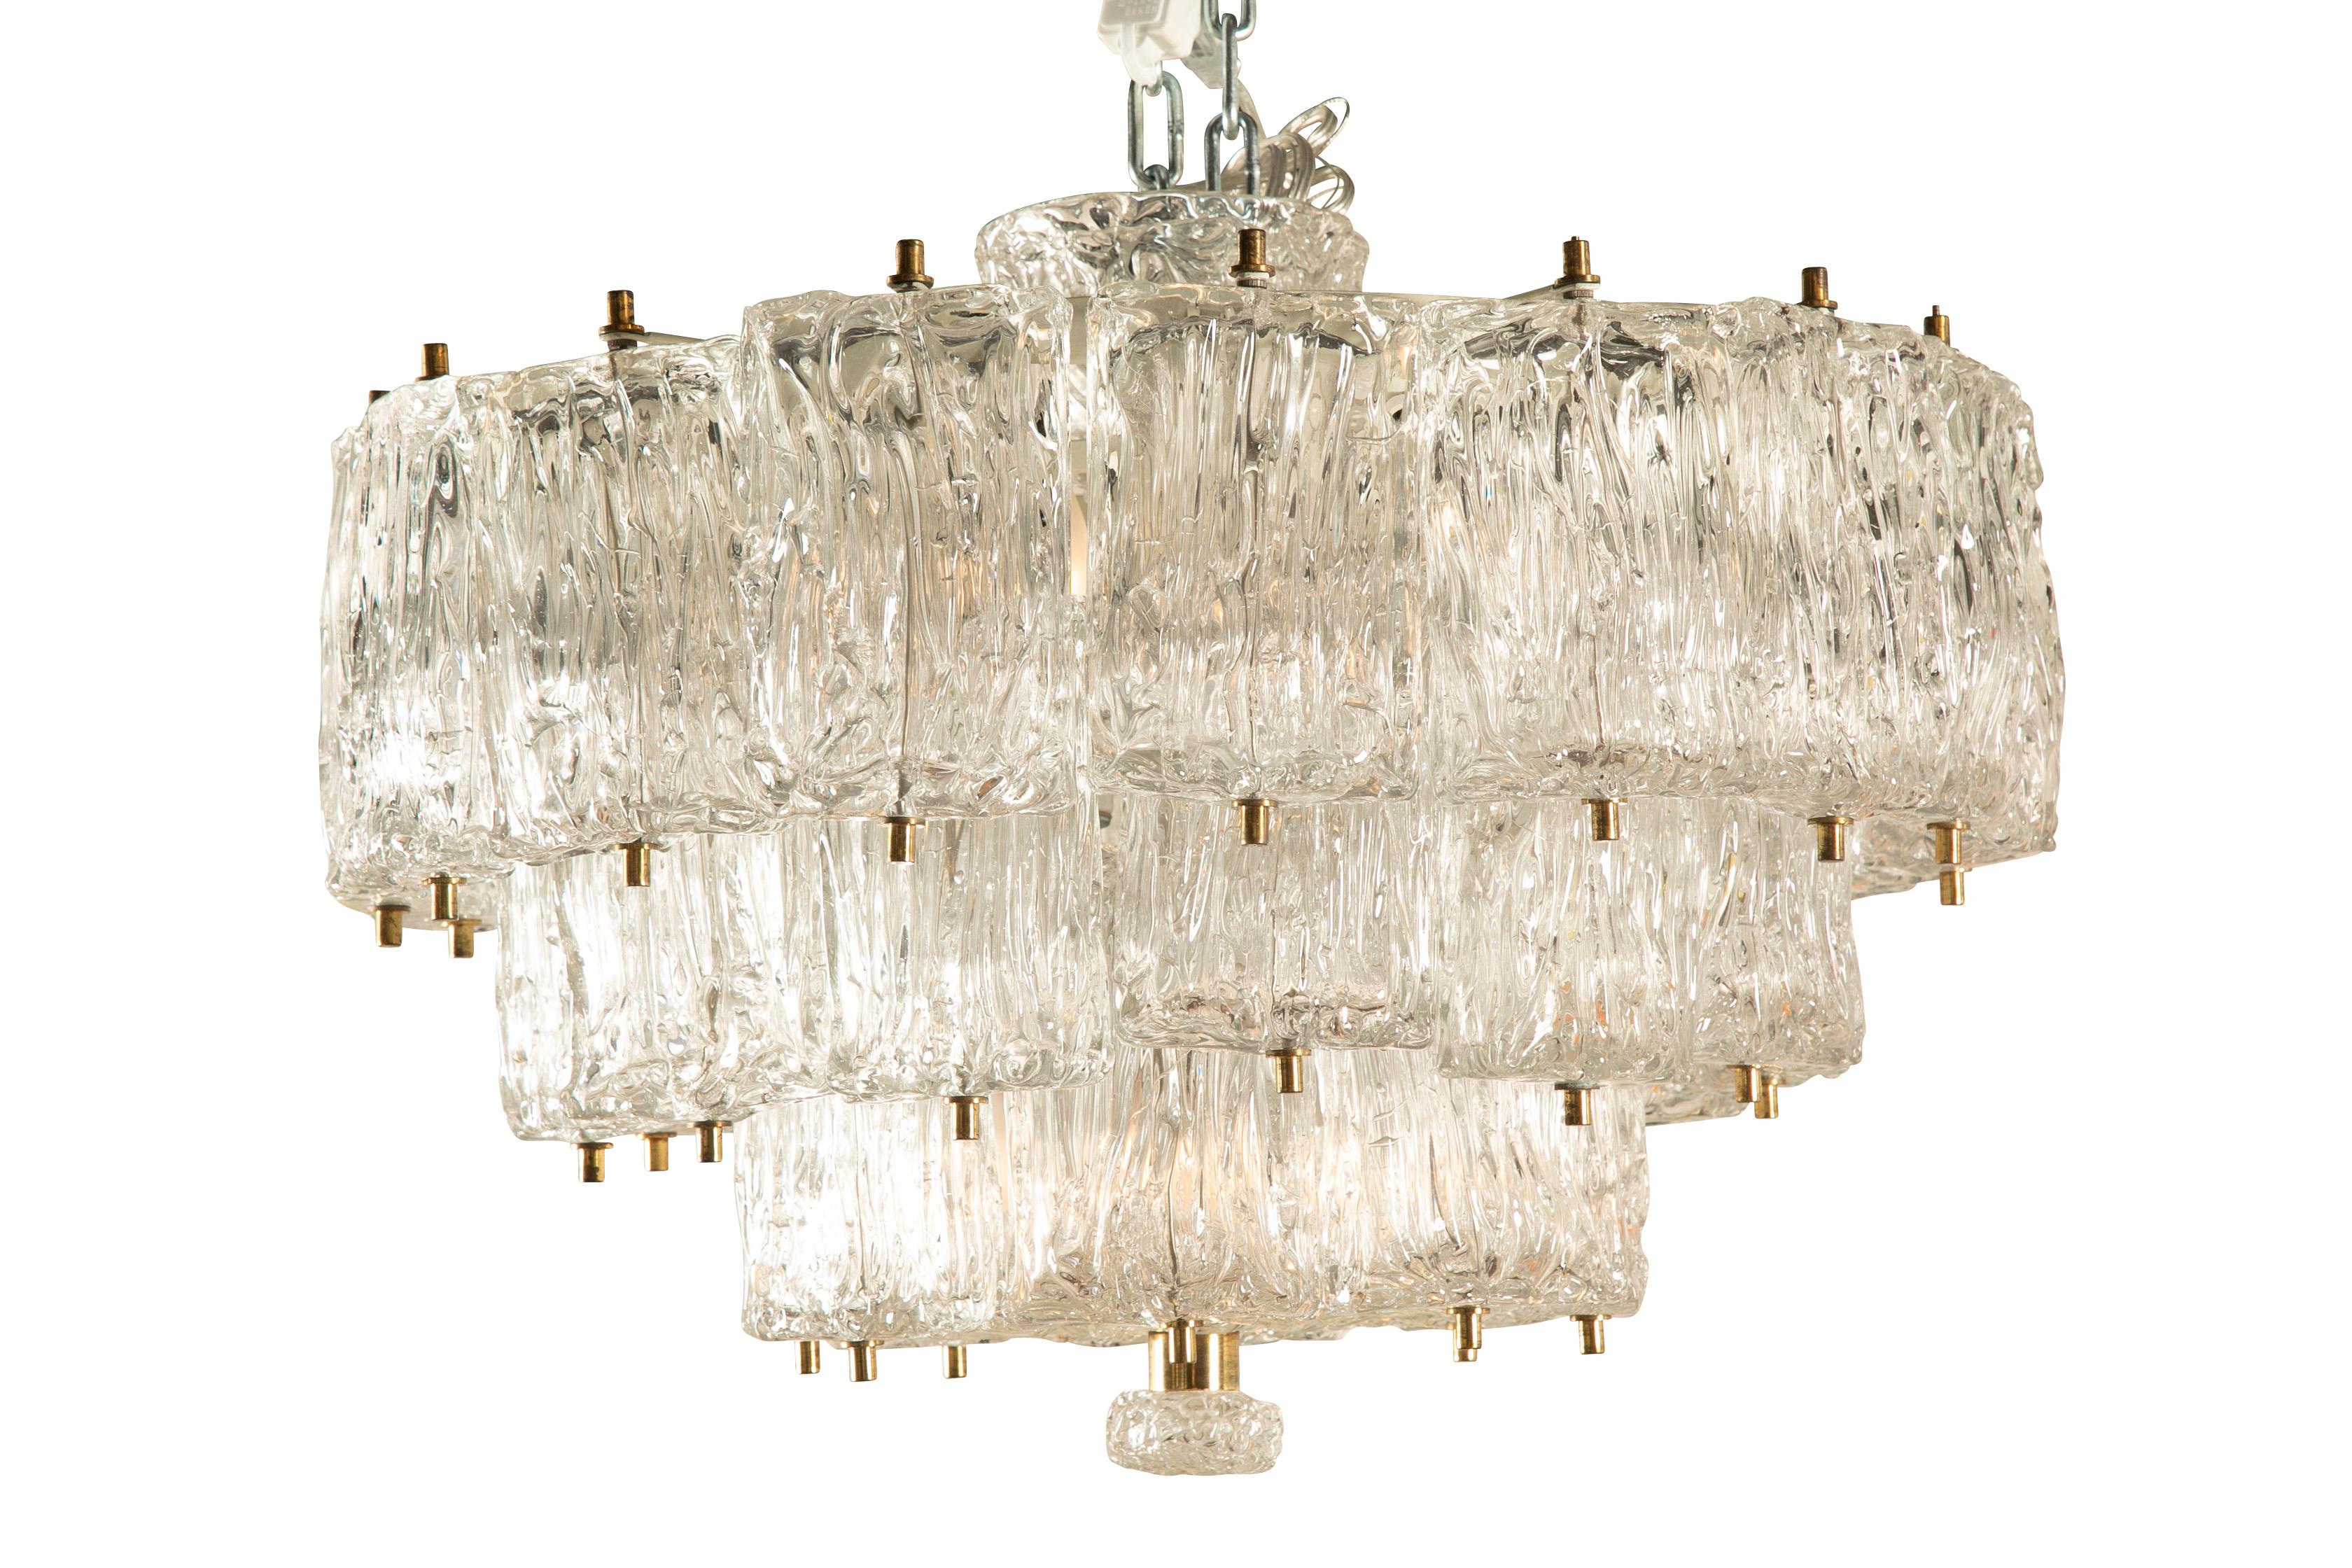 Three-Tier Murano Glass Chandelier by Barovier & Toso For Sale 2